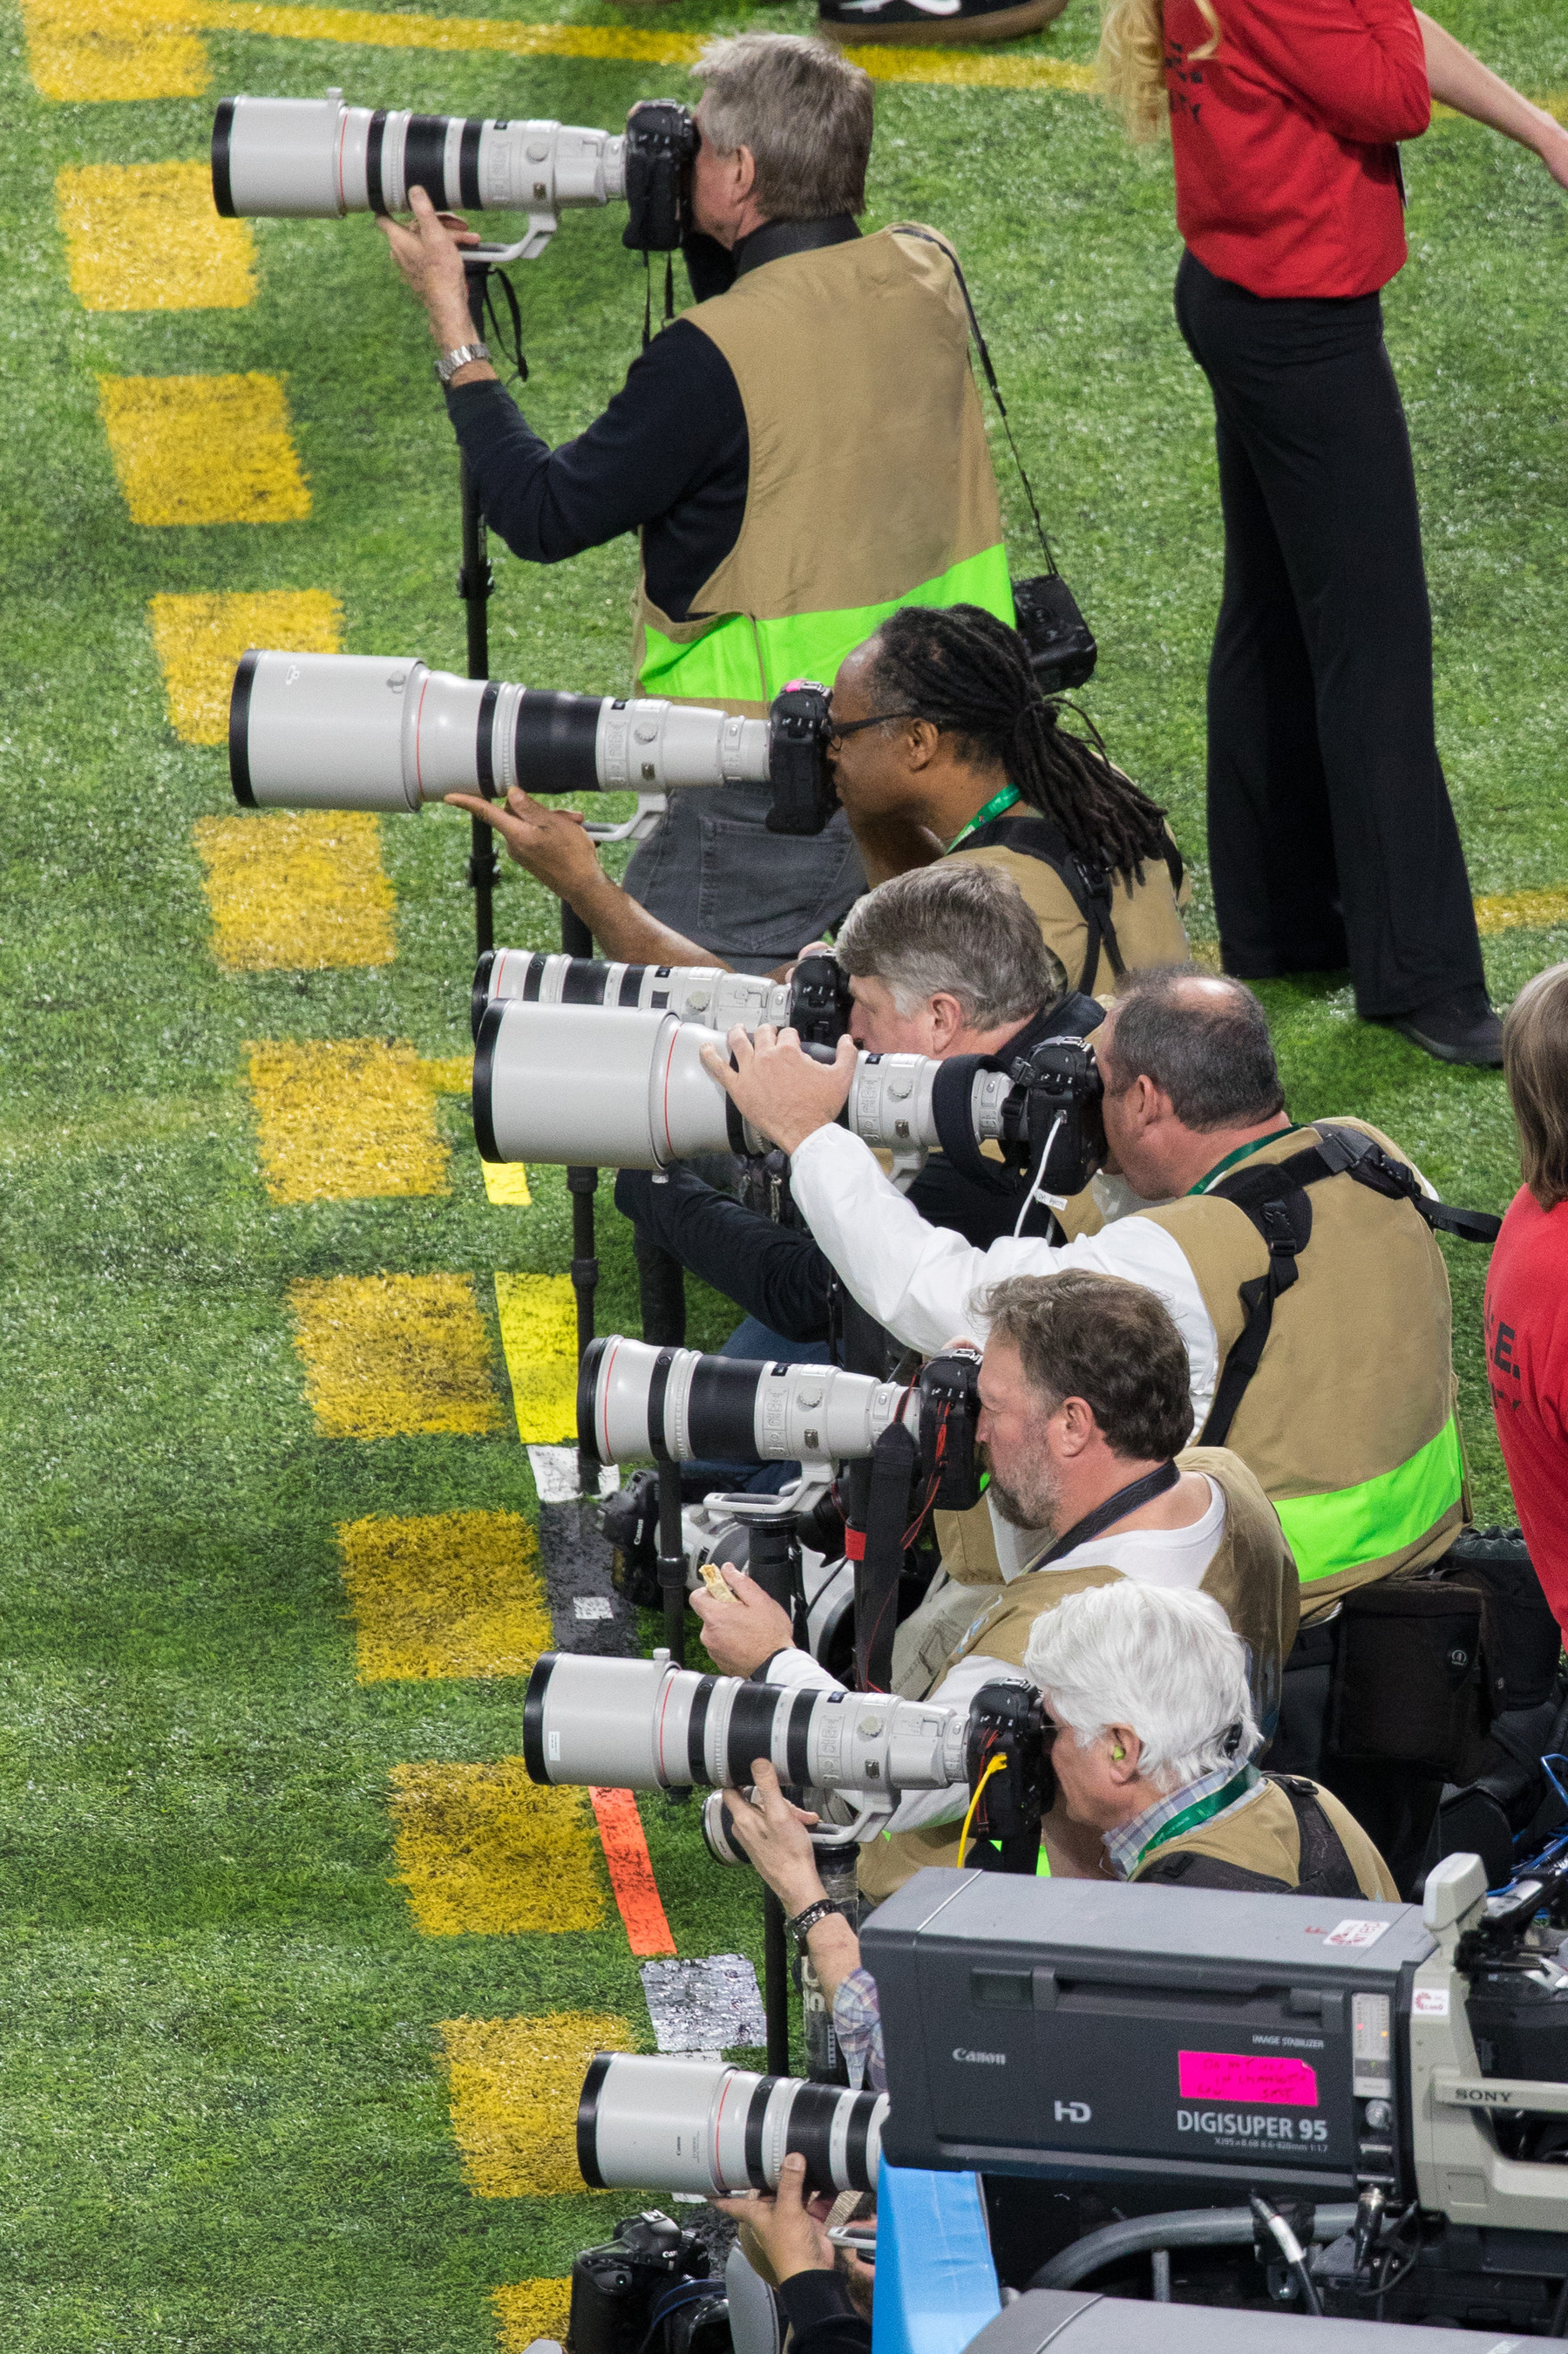 Canon Continues Its Leadership In The DSLR Camera Market With A Dominating Performance At The Big Game In Minnesota